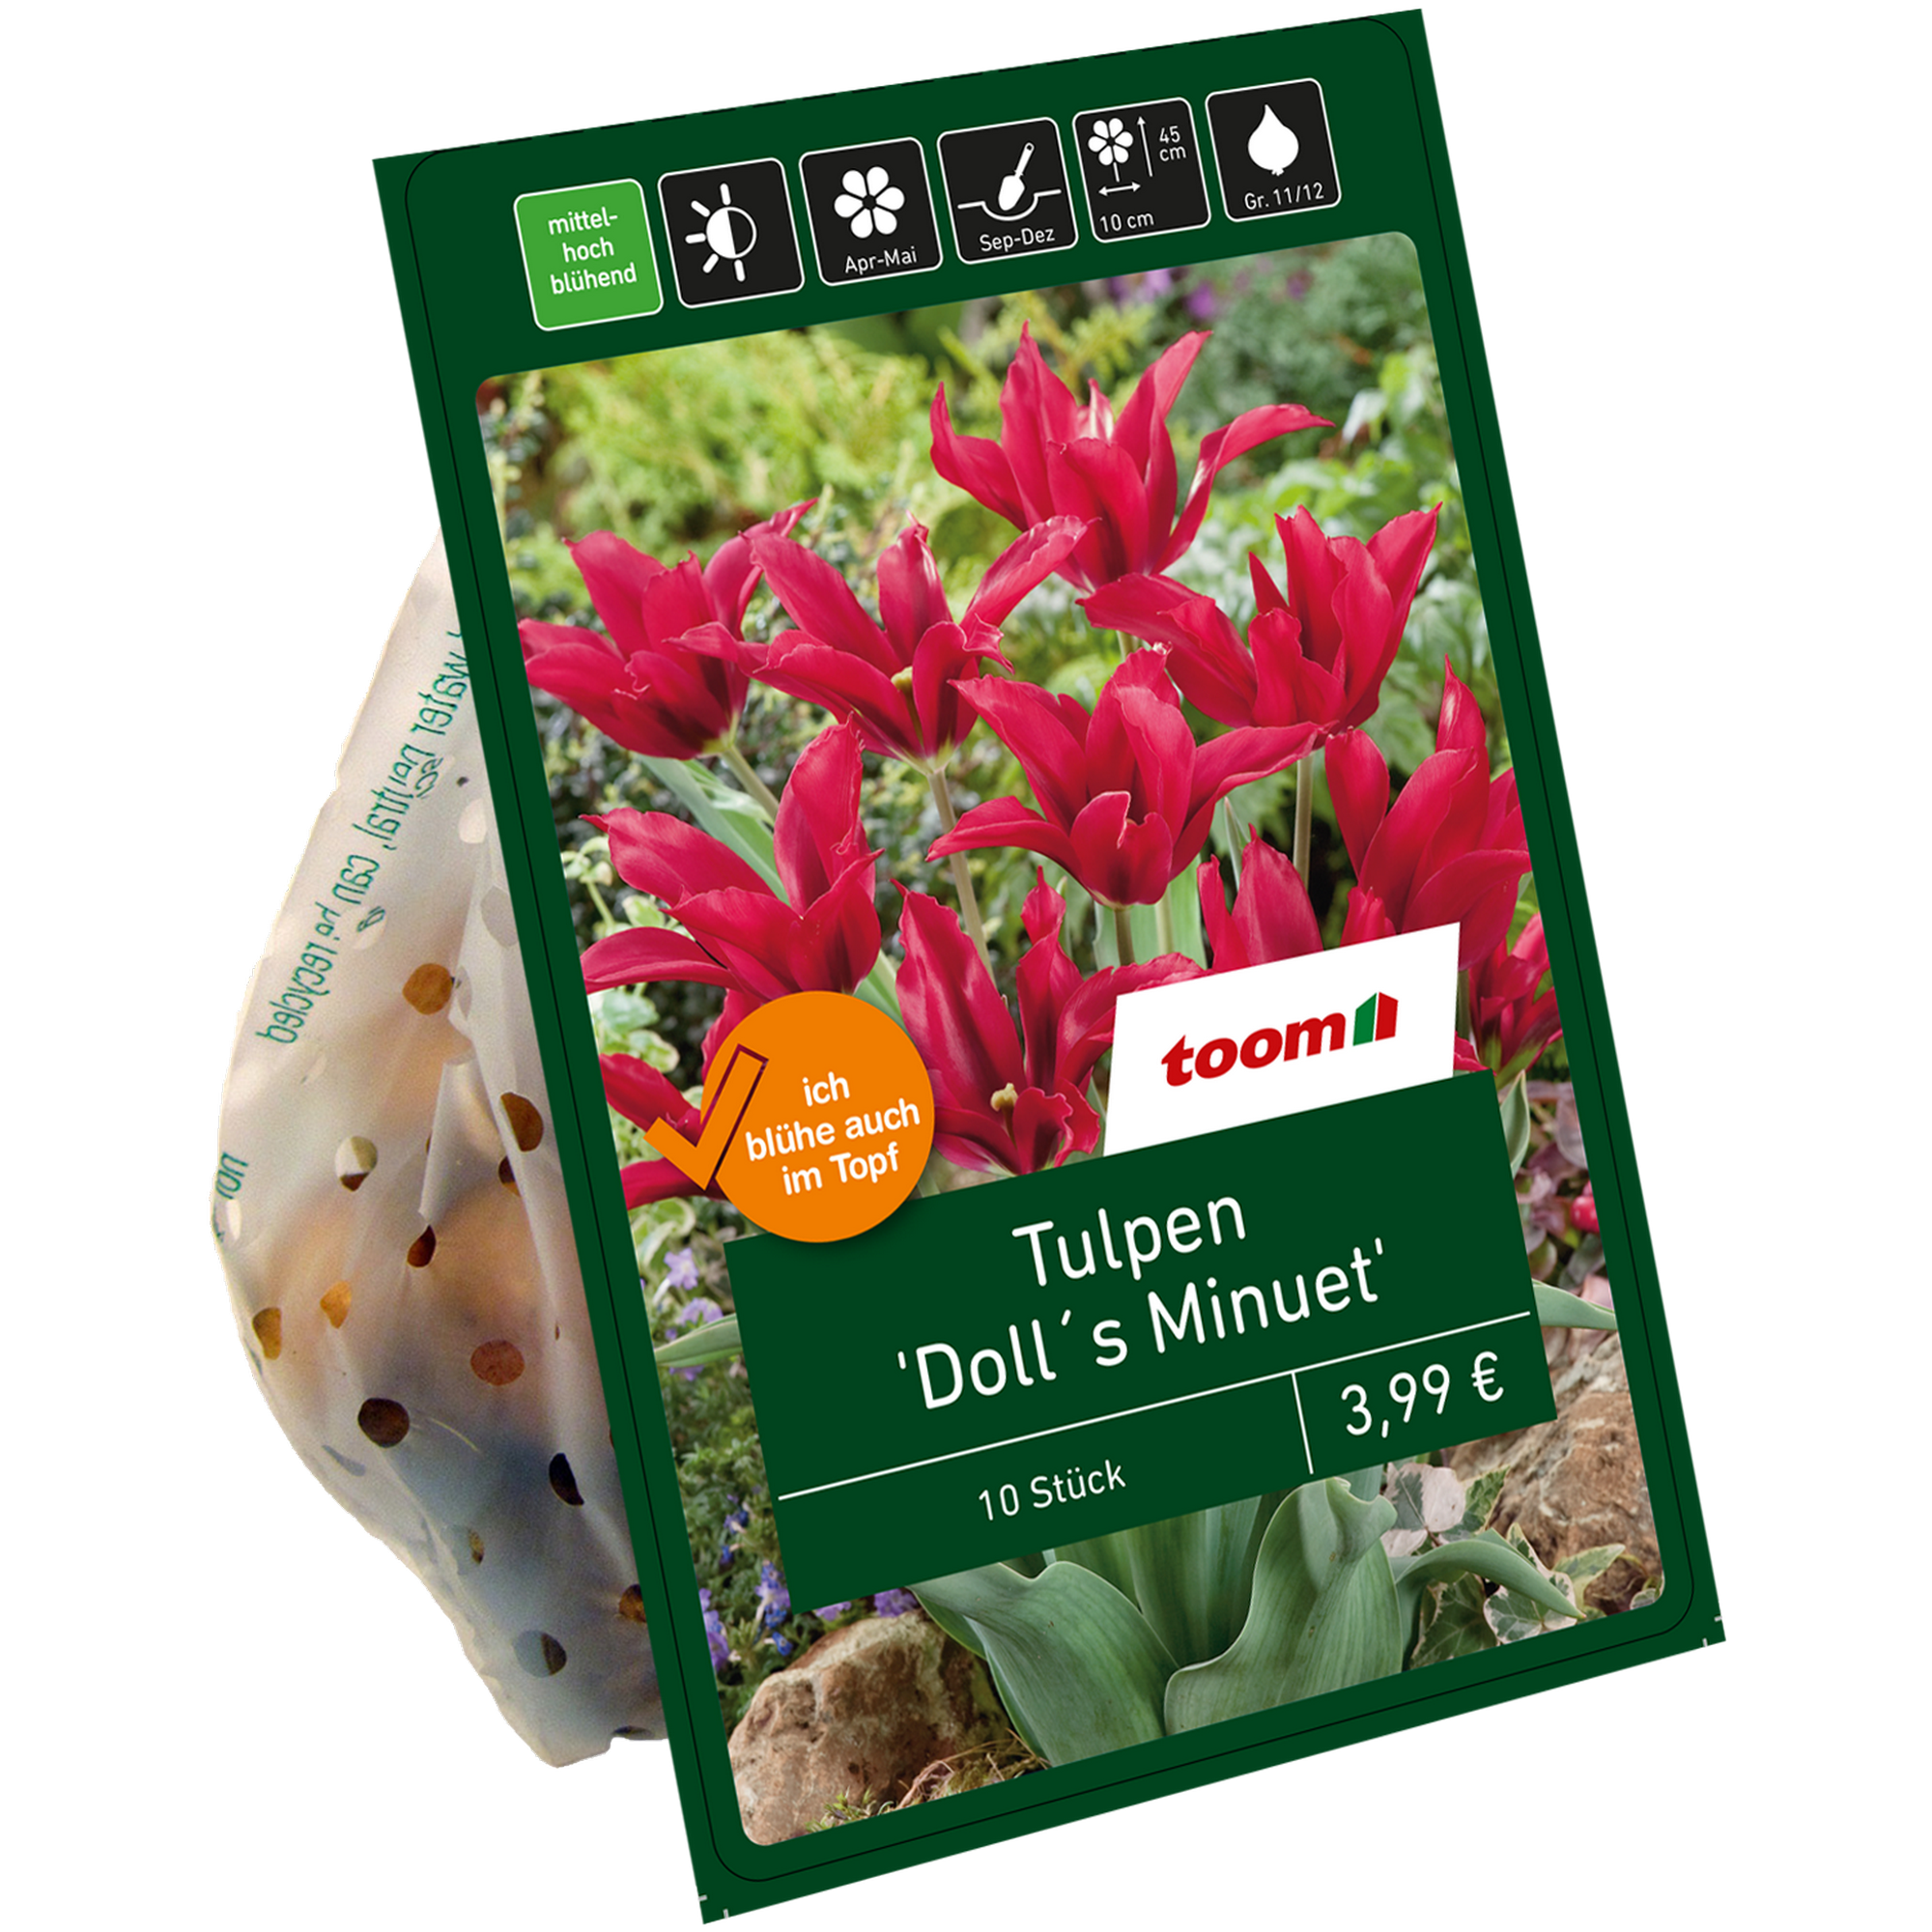 Tulpe 'Doll's Minuet' dunkelrot 10 Zwiebeln + product picture